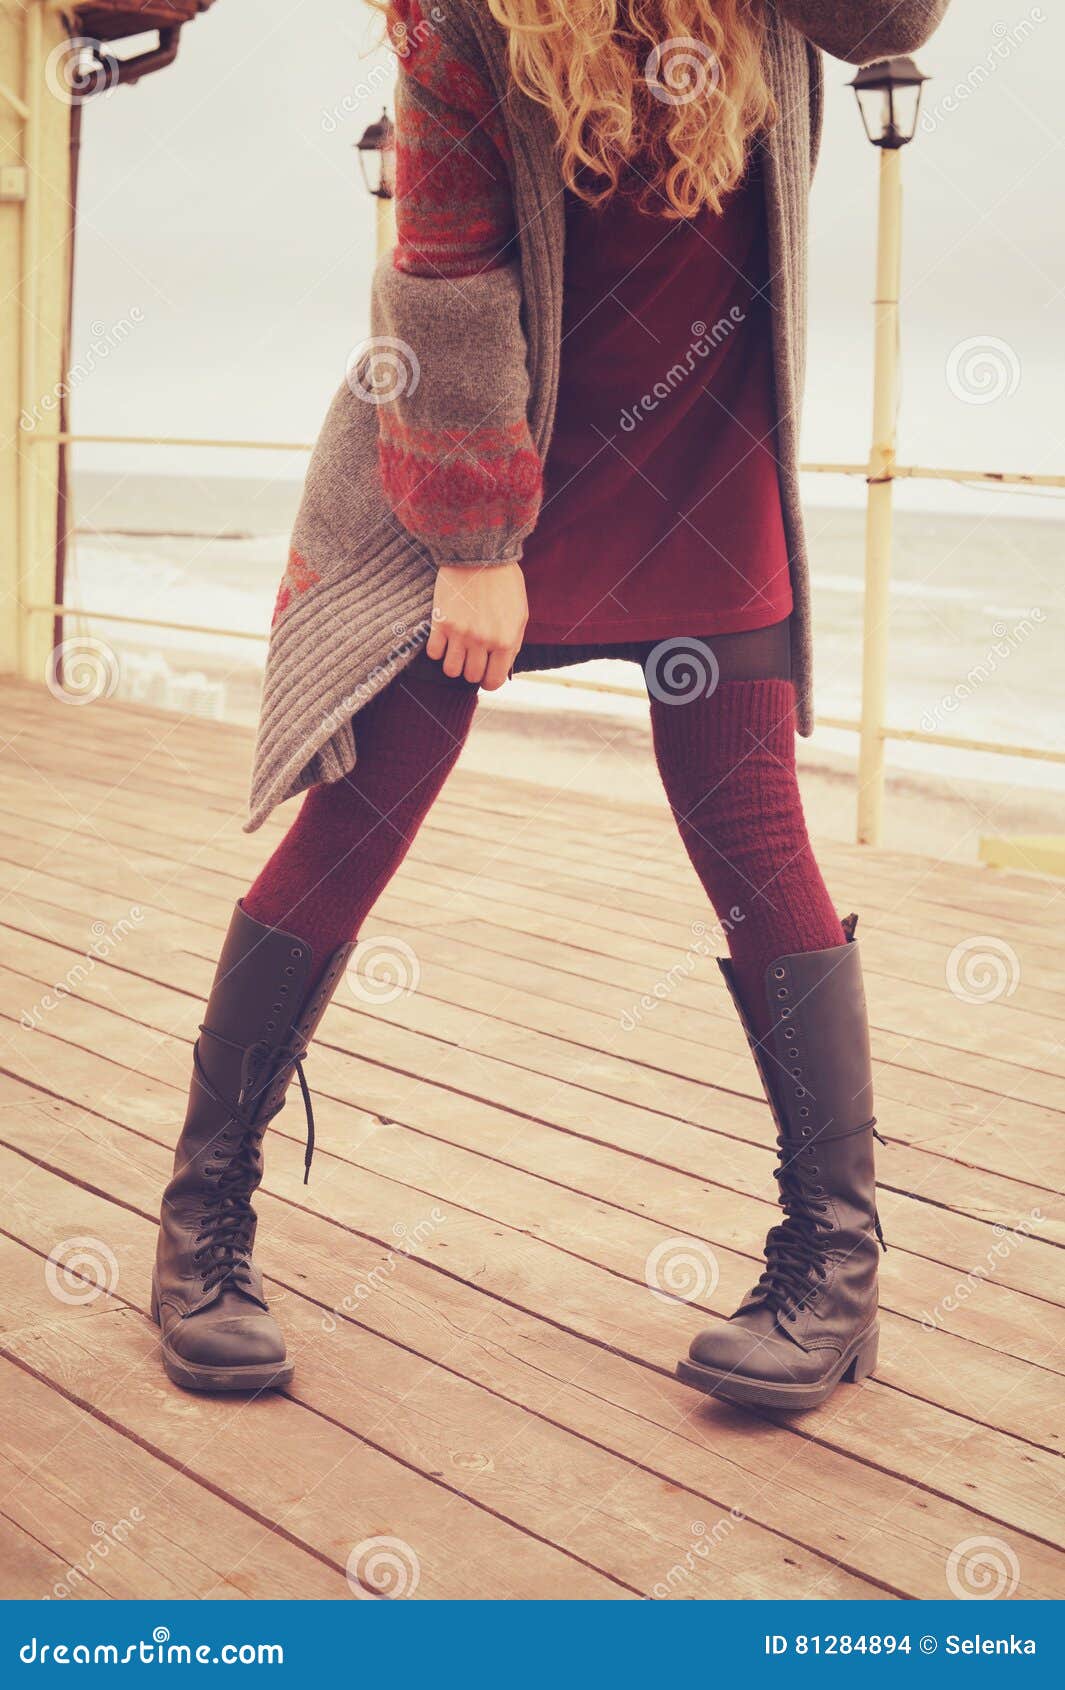 slim female legs dressed in leather shoes with laces and knitted